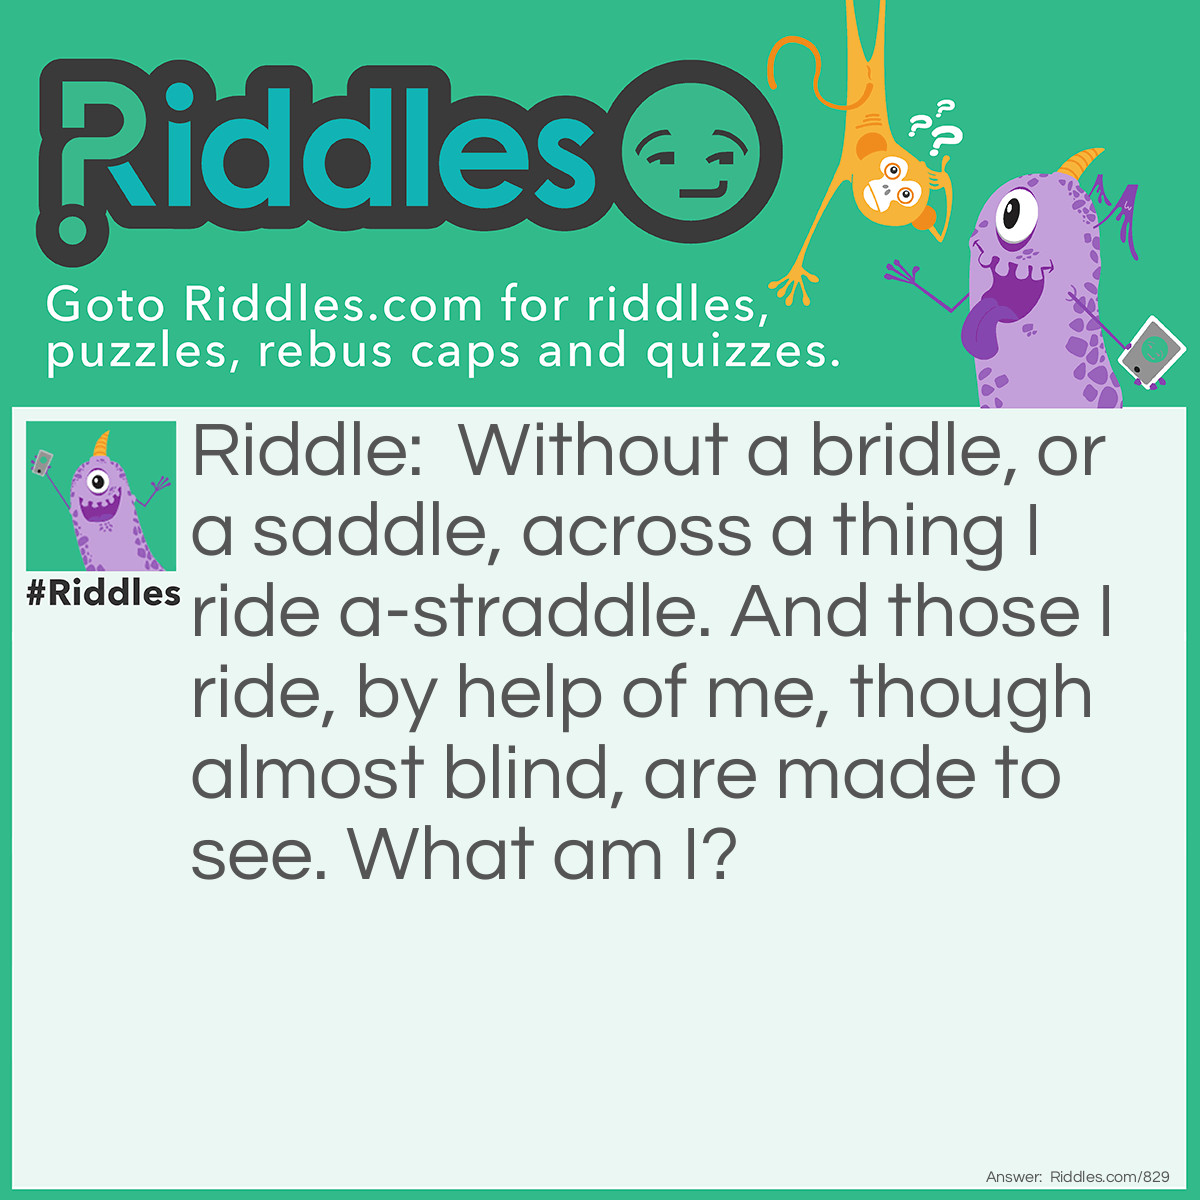 Riddle: Without a bridle, or a saddle, across a thing I ride a-straddle. And those I ride, by help of me, though almost blind, are made to see.
What am I? Answer: Eye glasses.